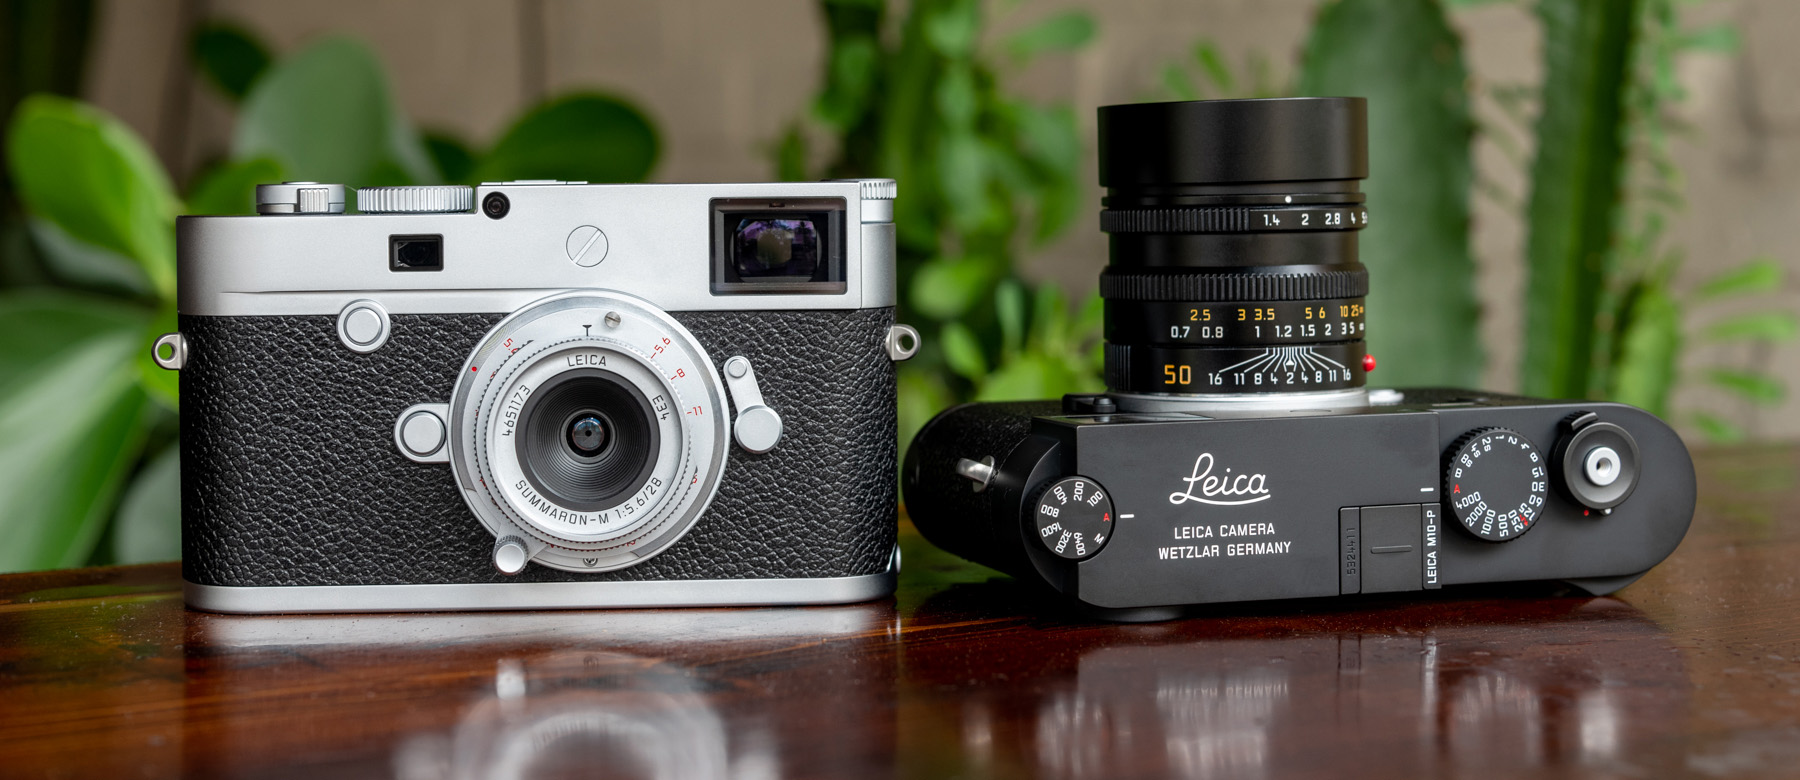 Leica M10-P Price Reduced, M10 & M10-D Discontinued | Red Dot Forum